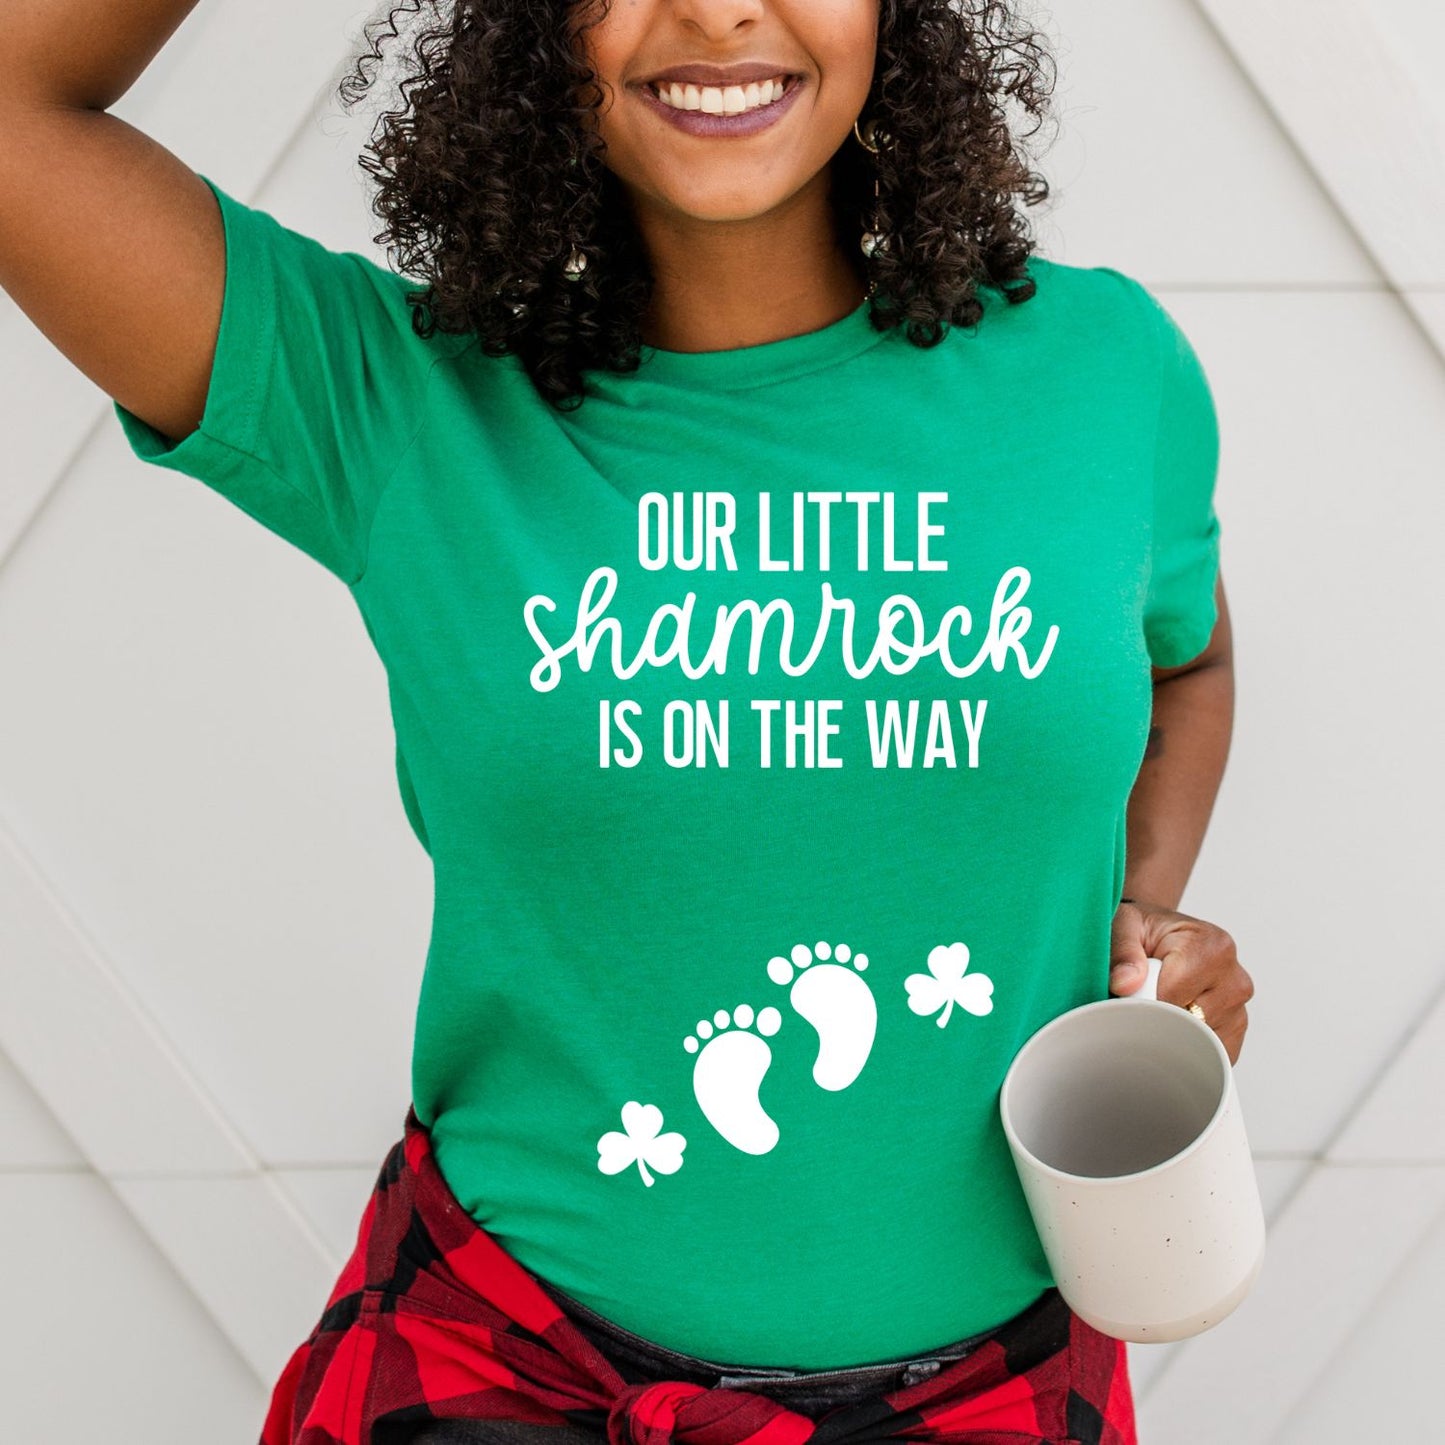 Our Little Shamrock is On The Way - St. Paddy's Day - Pregnancy Announcement Shirt